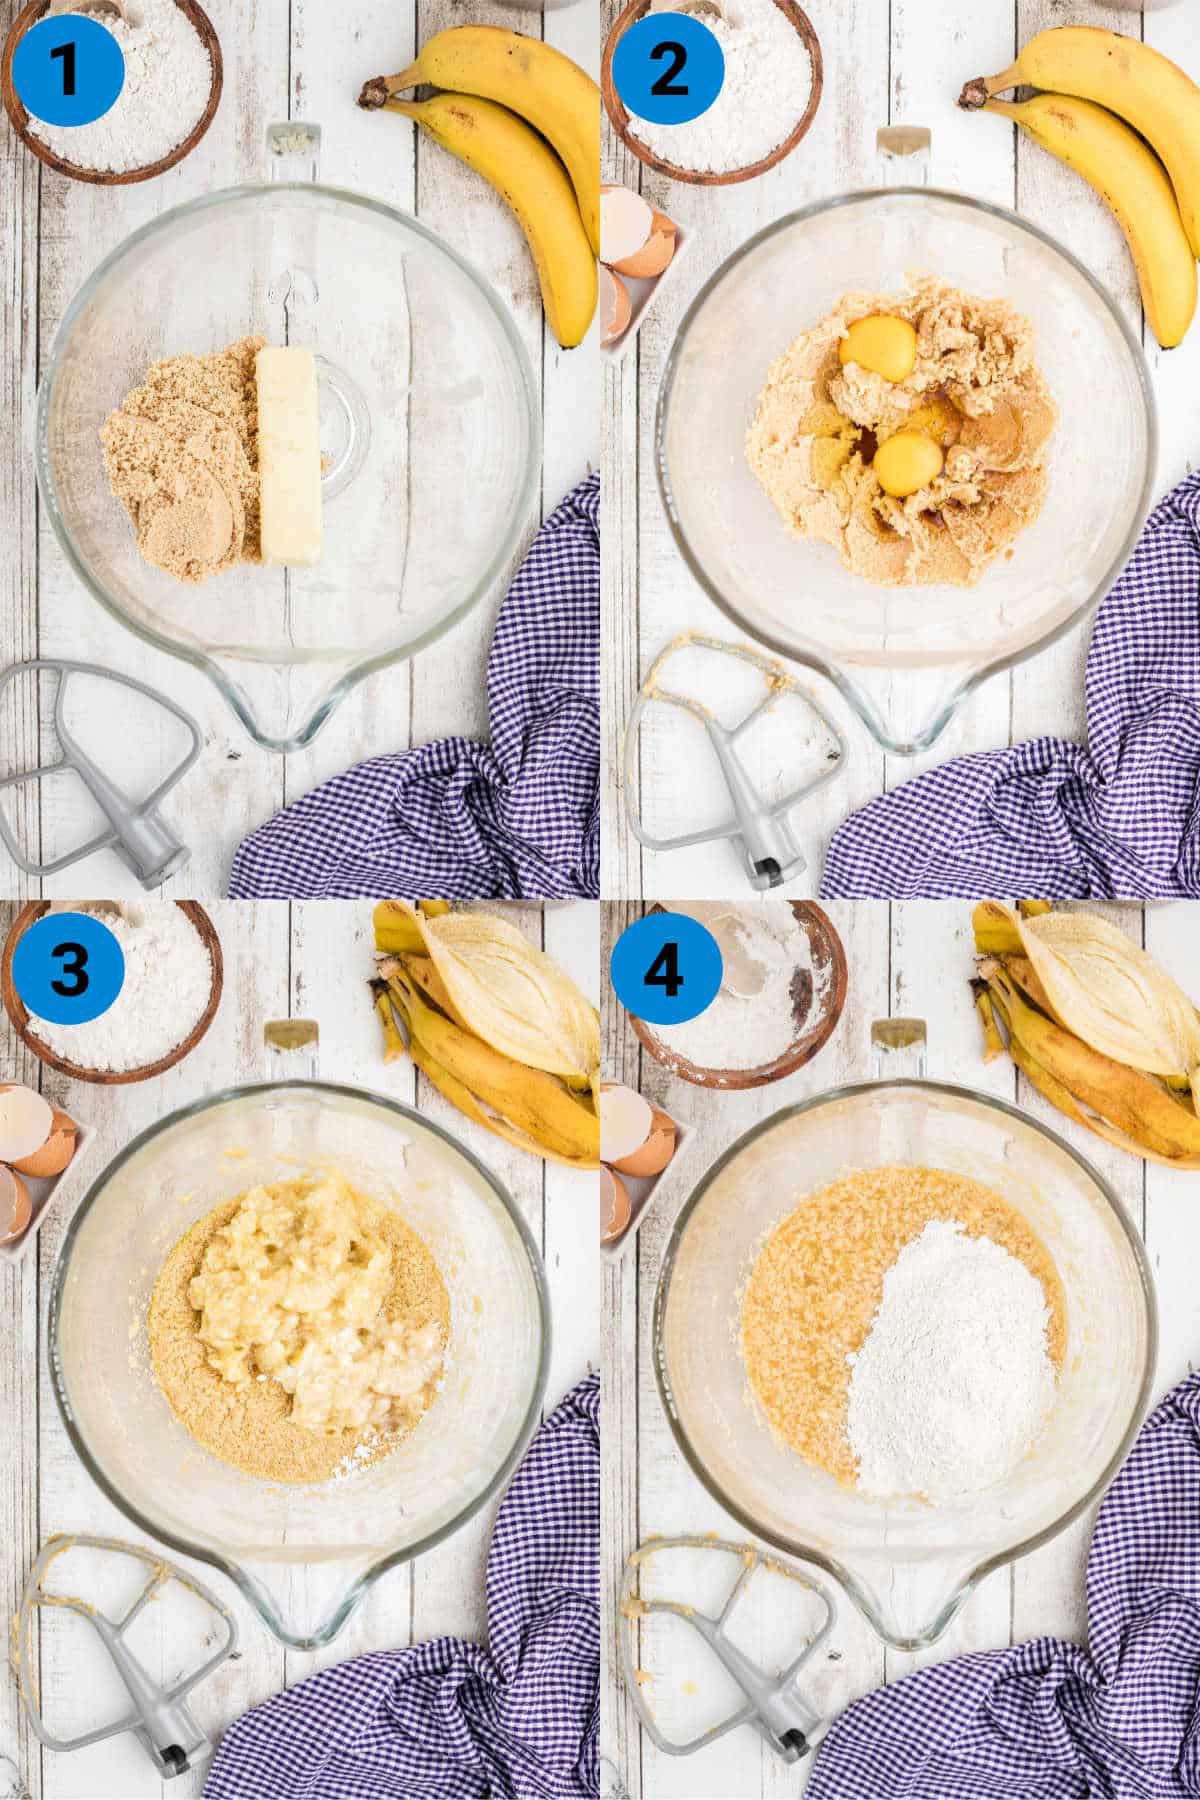 A collage of four images showing how to make bananas foster cookies, recipe steps 1-4.